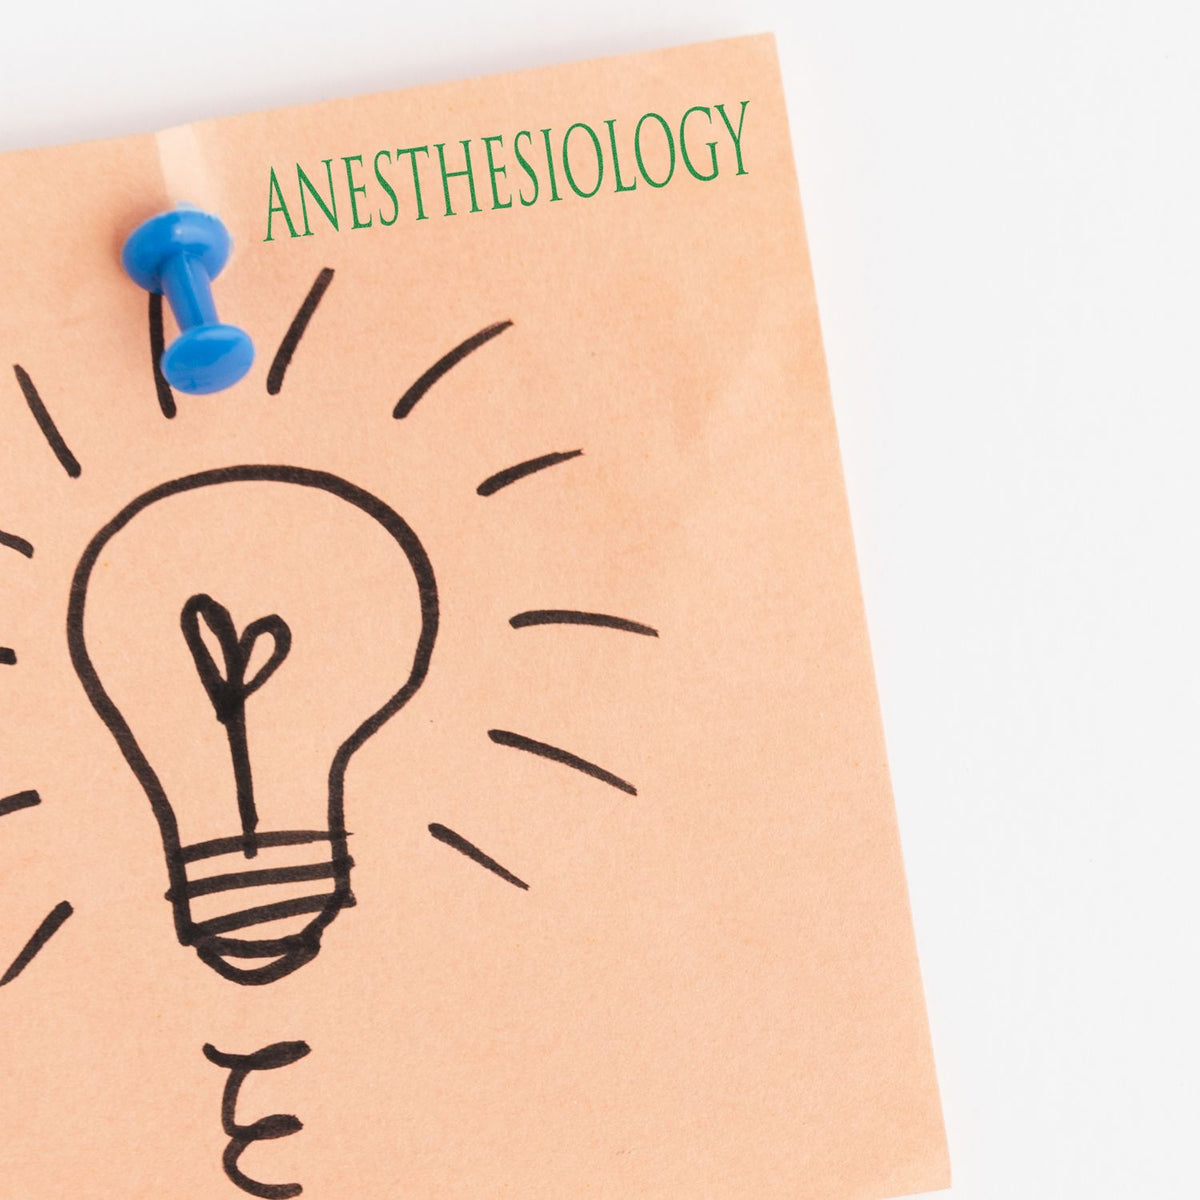 Anesthesiology Rubber Stamp In Use